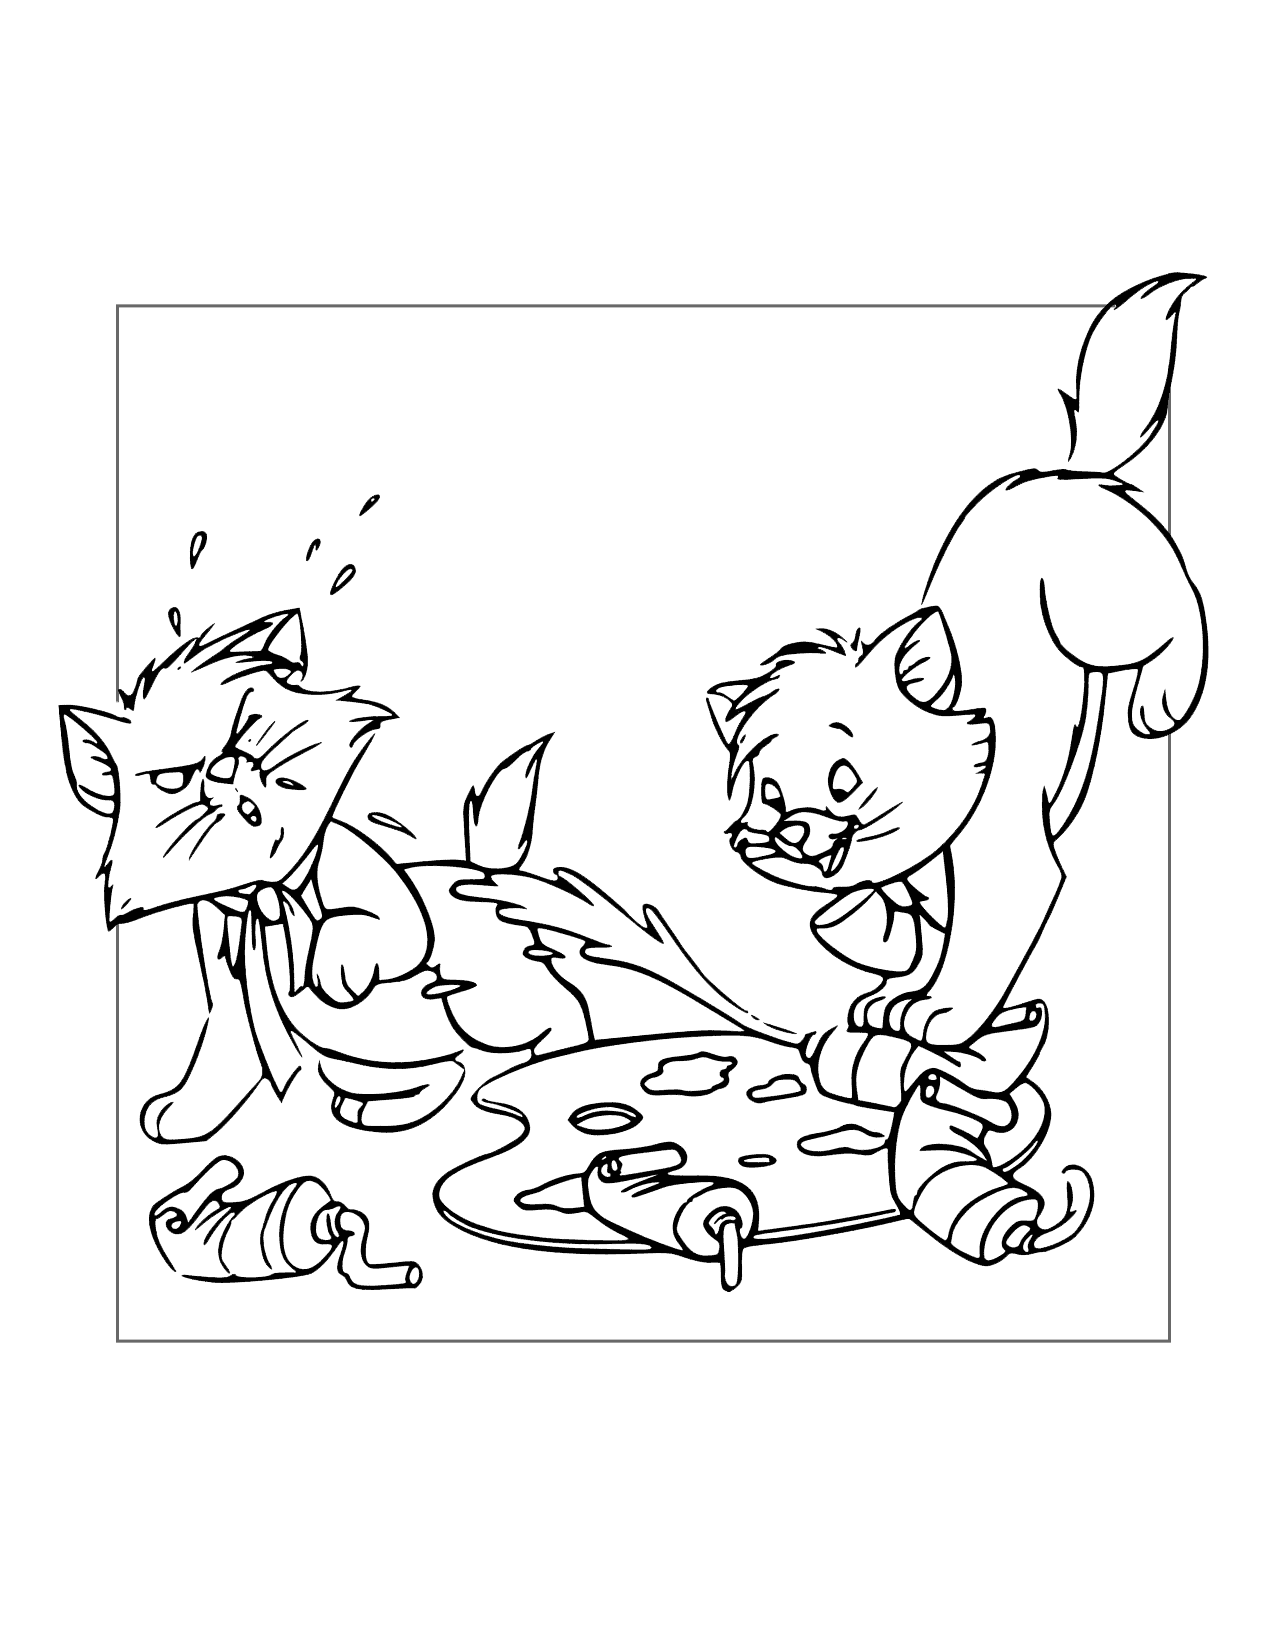 Toulouse And Beroiz Play With Paint Coloring Page